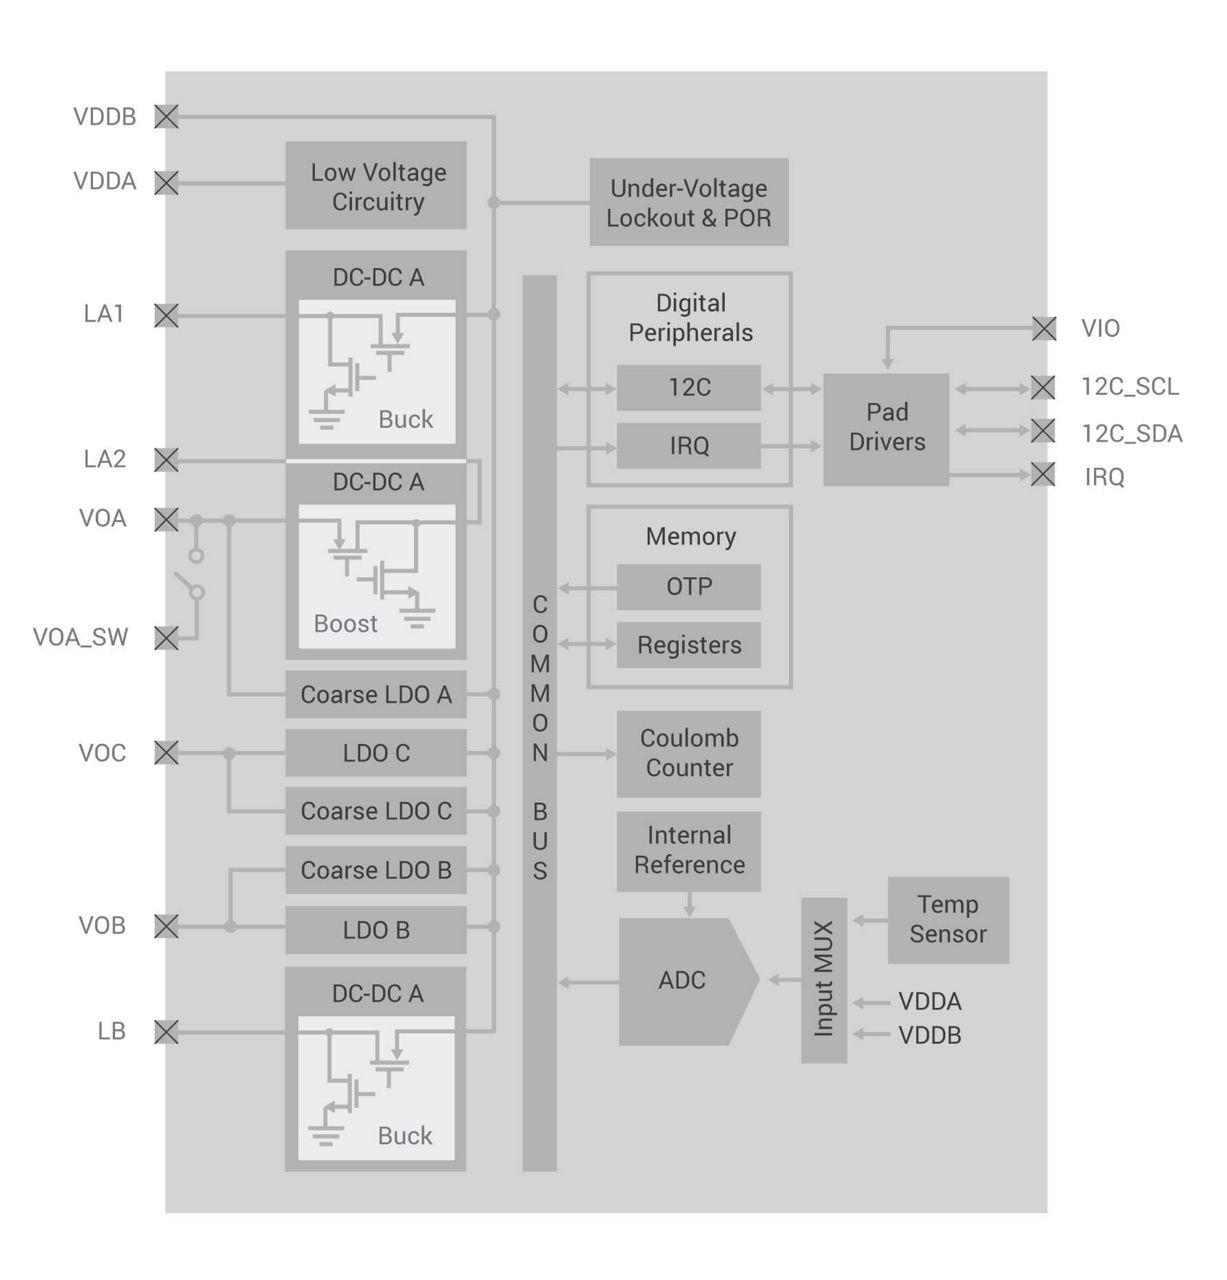 https://silabs.scene7.com/is/image/siliconlabs/EFP-block-diagram?$Large2Column30pct$